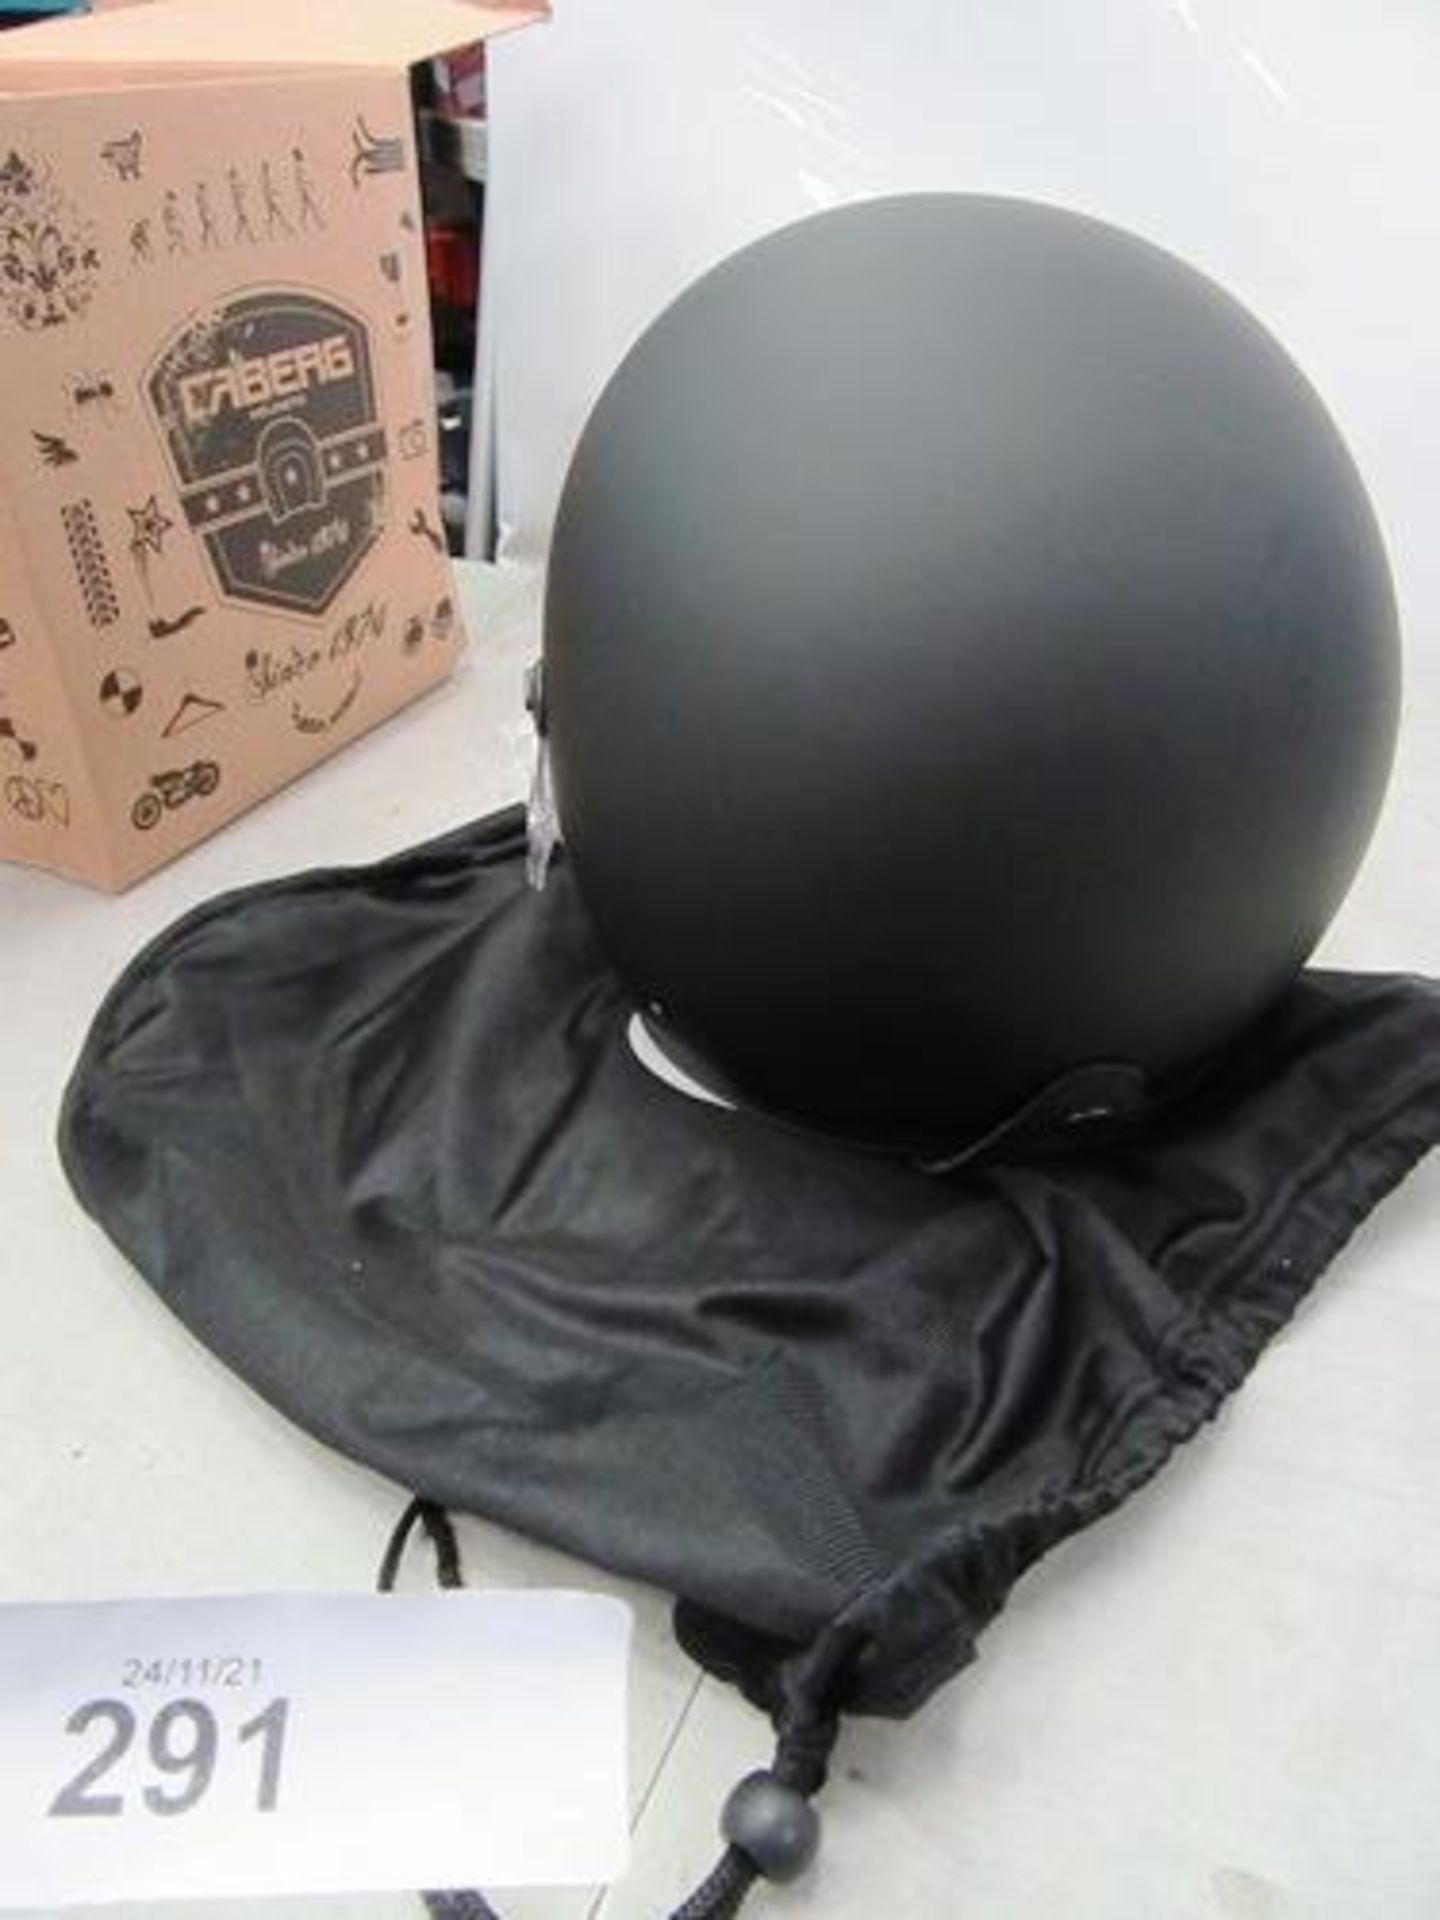 1 x Caberg Jet Free Ride matte black motorcycle helmet, size medium - New in box (GS14end) - Image 2 of 2